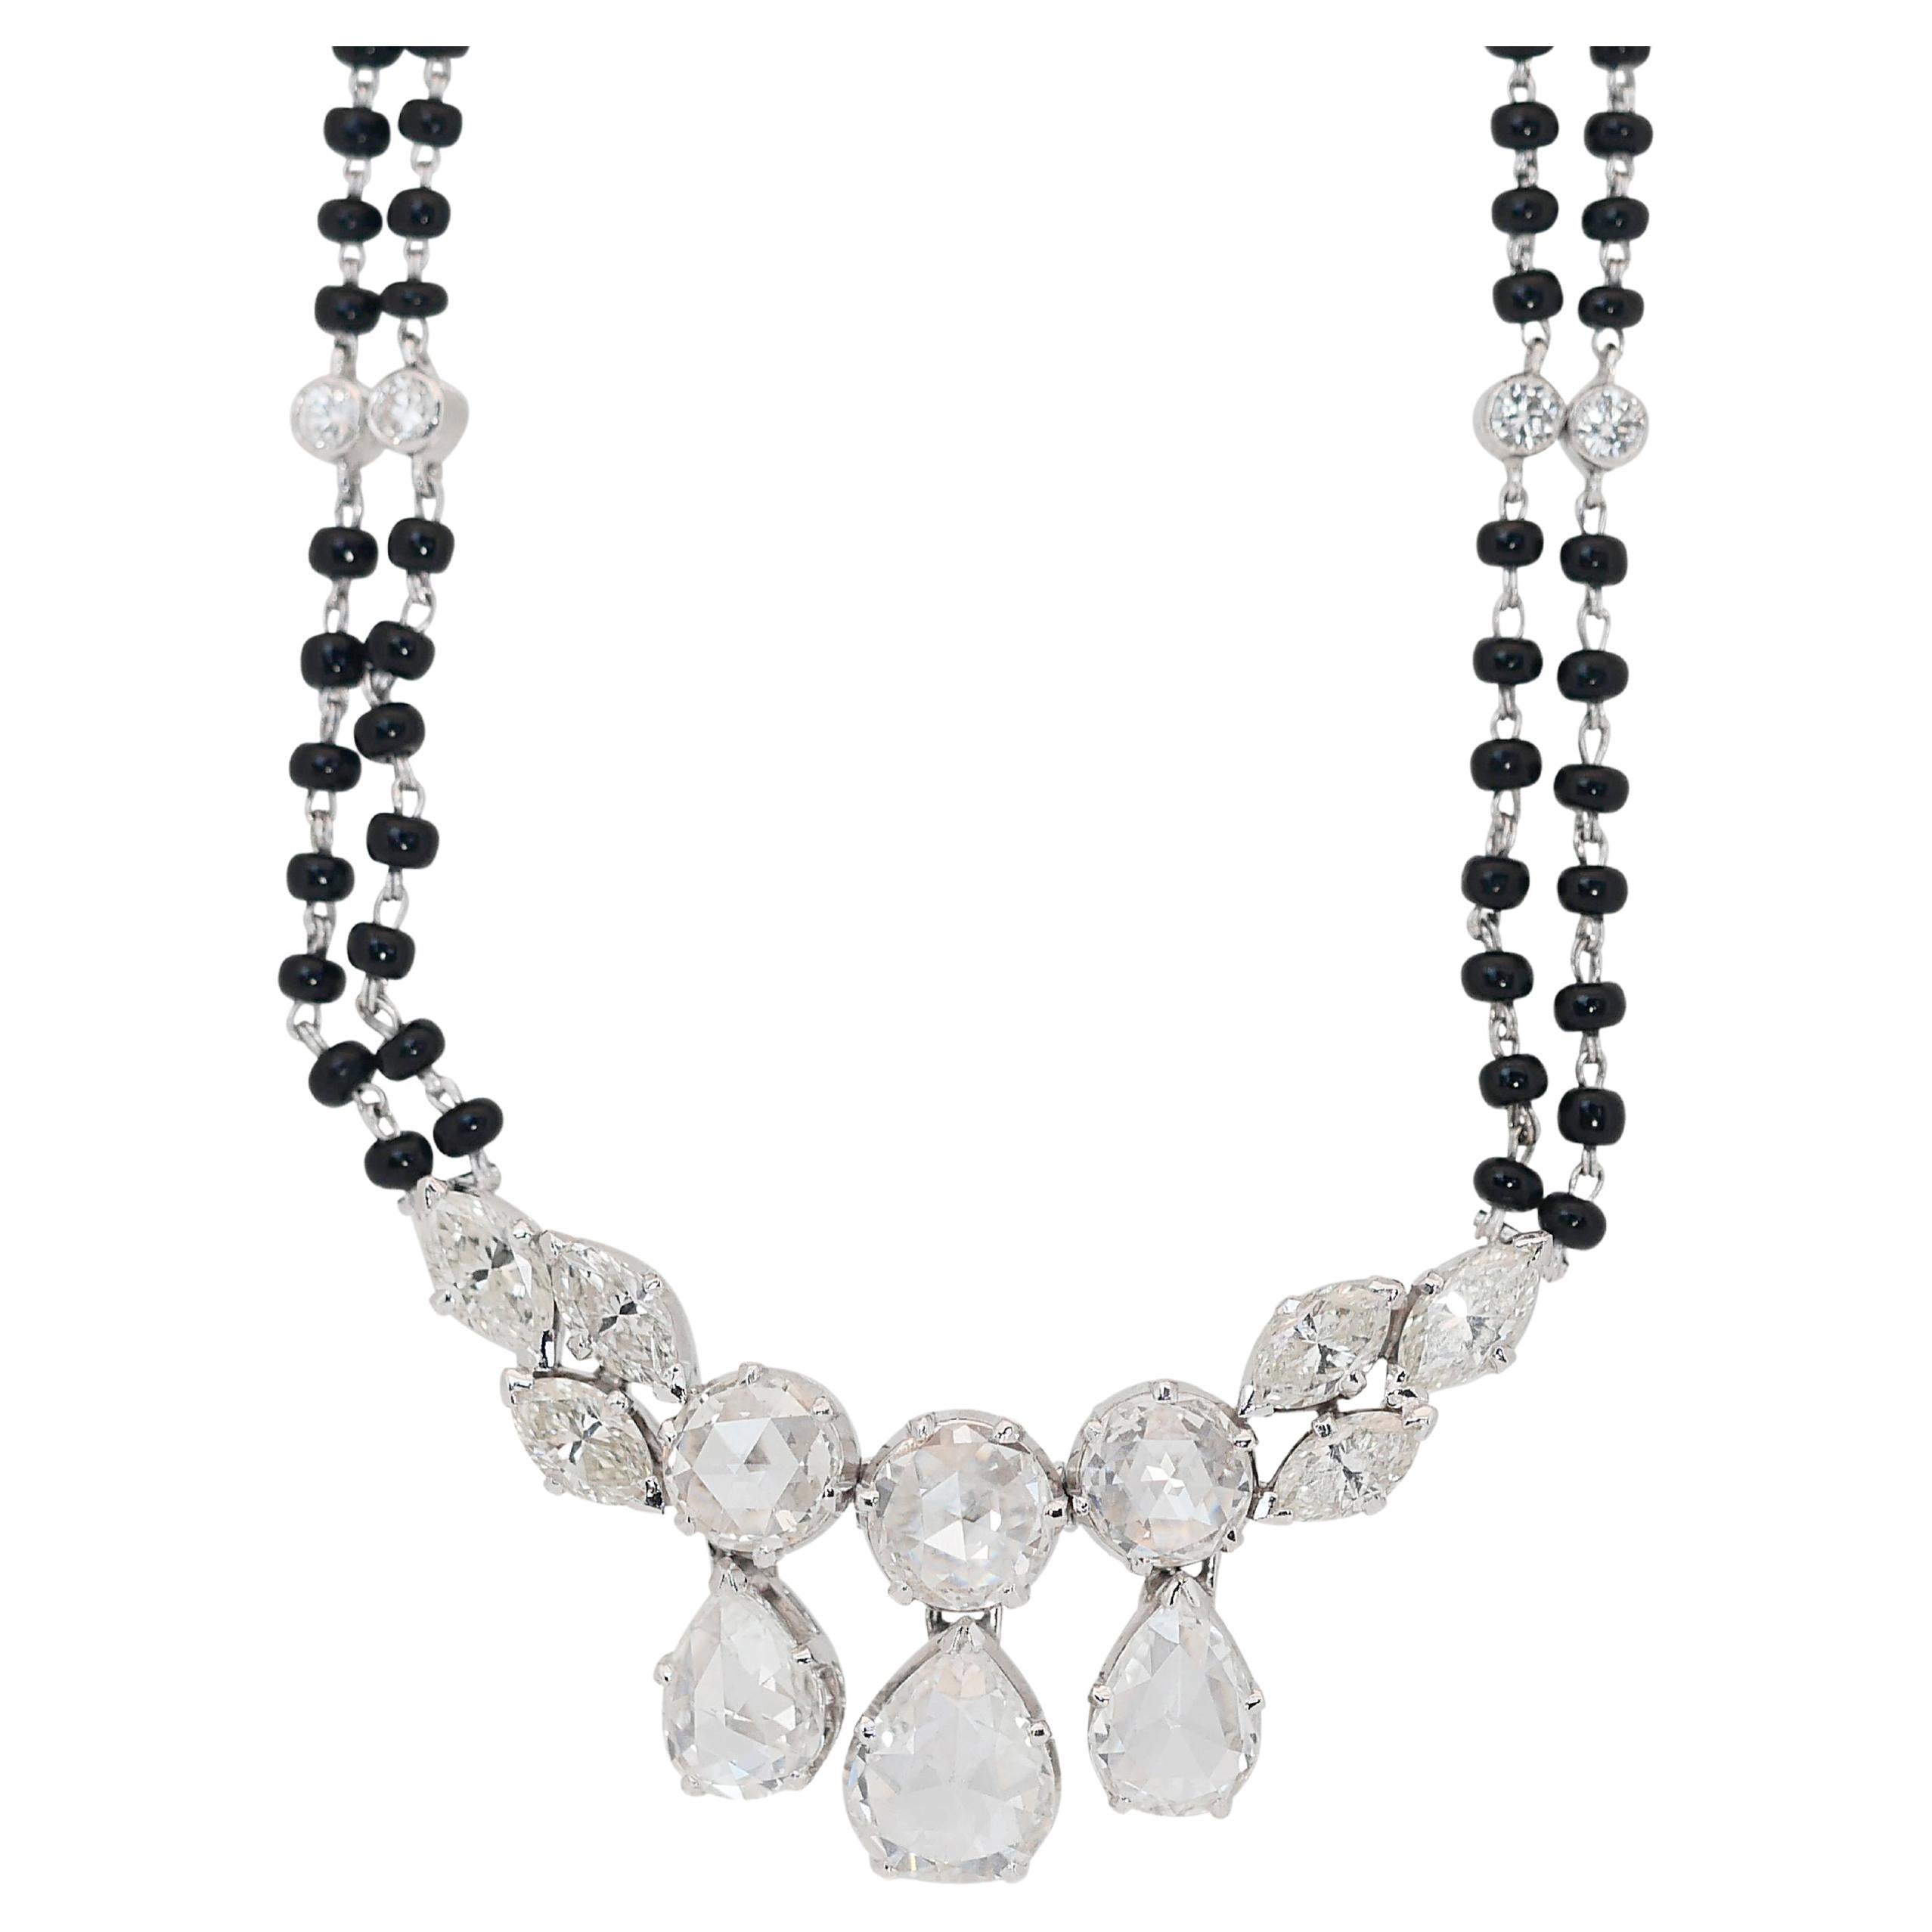 Glamorous 8.02 ct Onyx and Diamond Necklace in 18k White Gold - IGI Certified For Sale